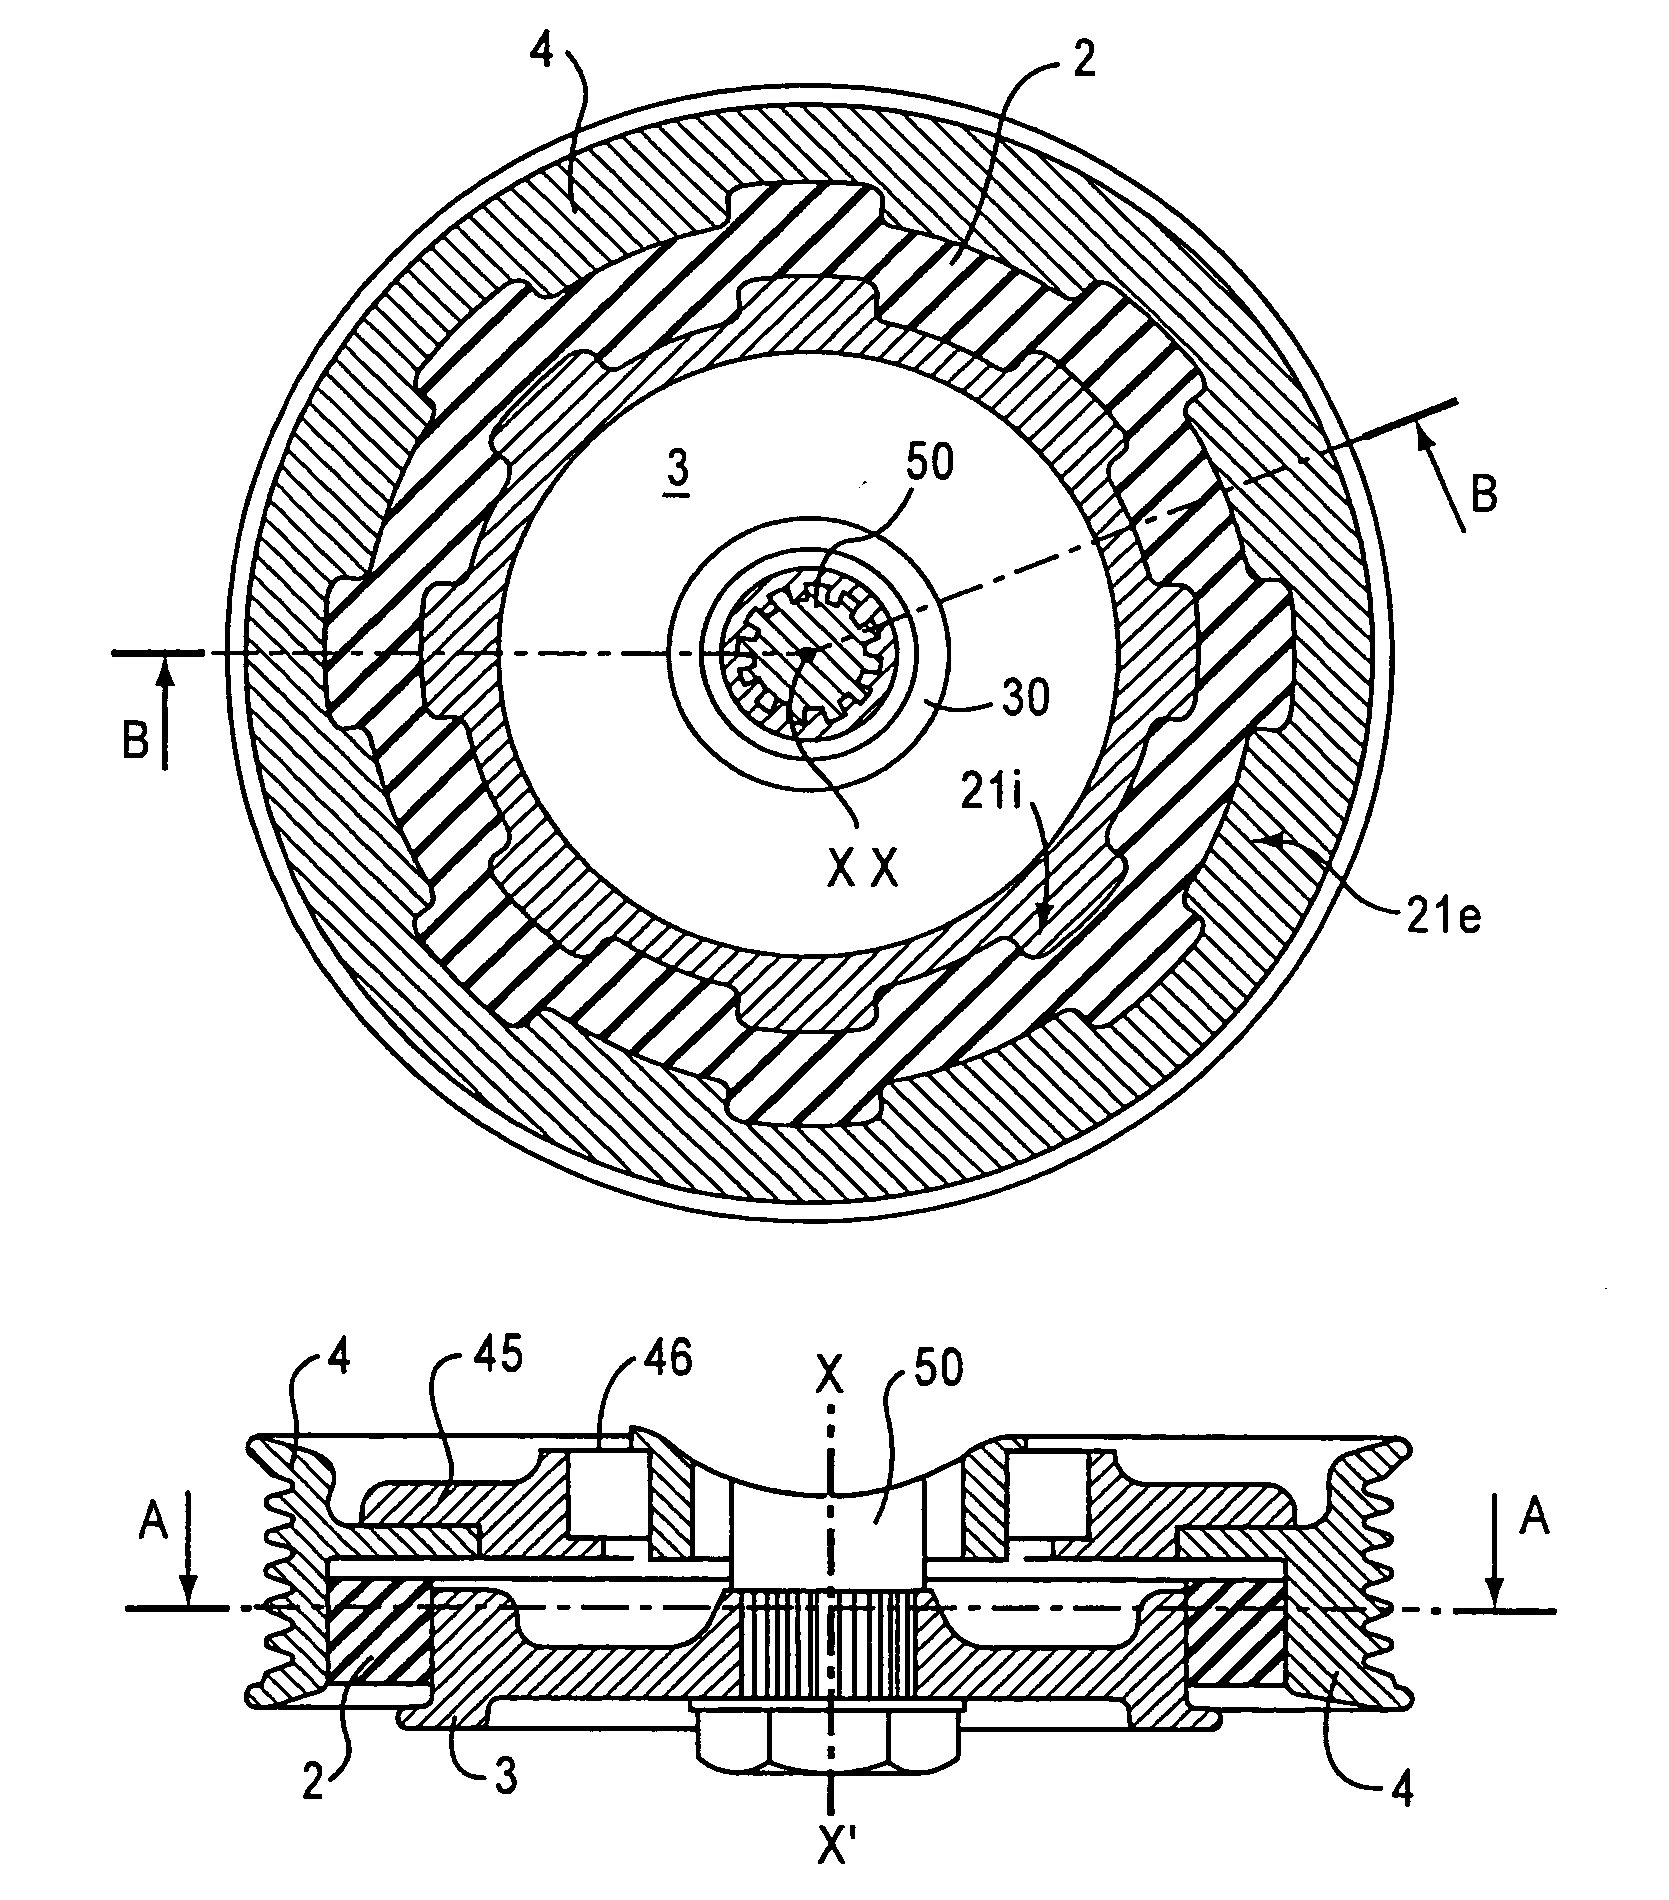 Decoupling element of deformable material in a power transmission system